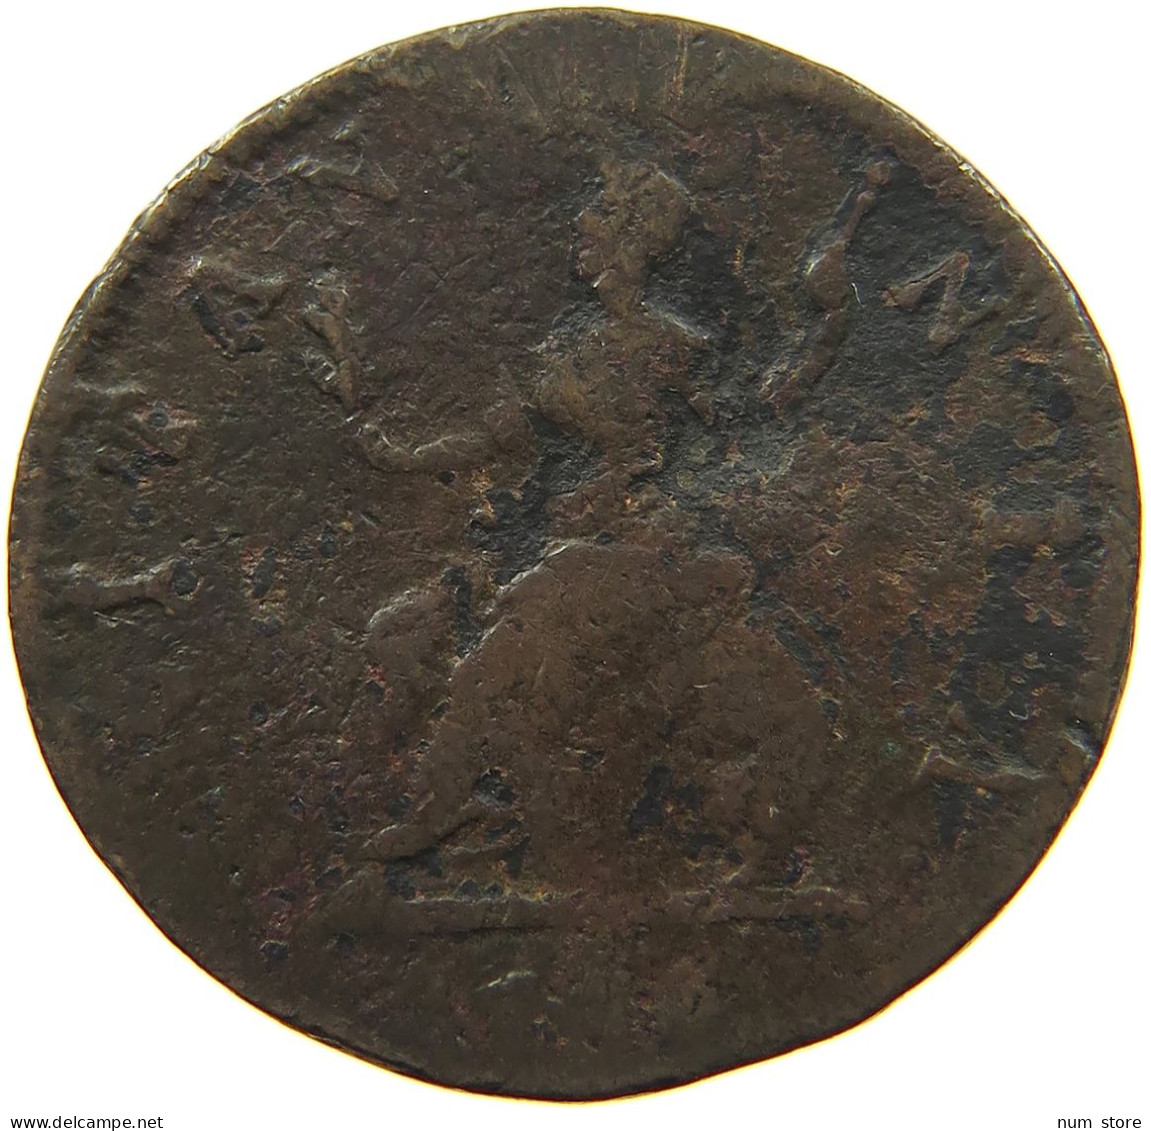 GREAT BRITAIN FARTHING 1753? George II. 1727-1760. #s020 0249 - A. 1 Farthing